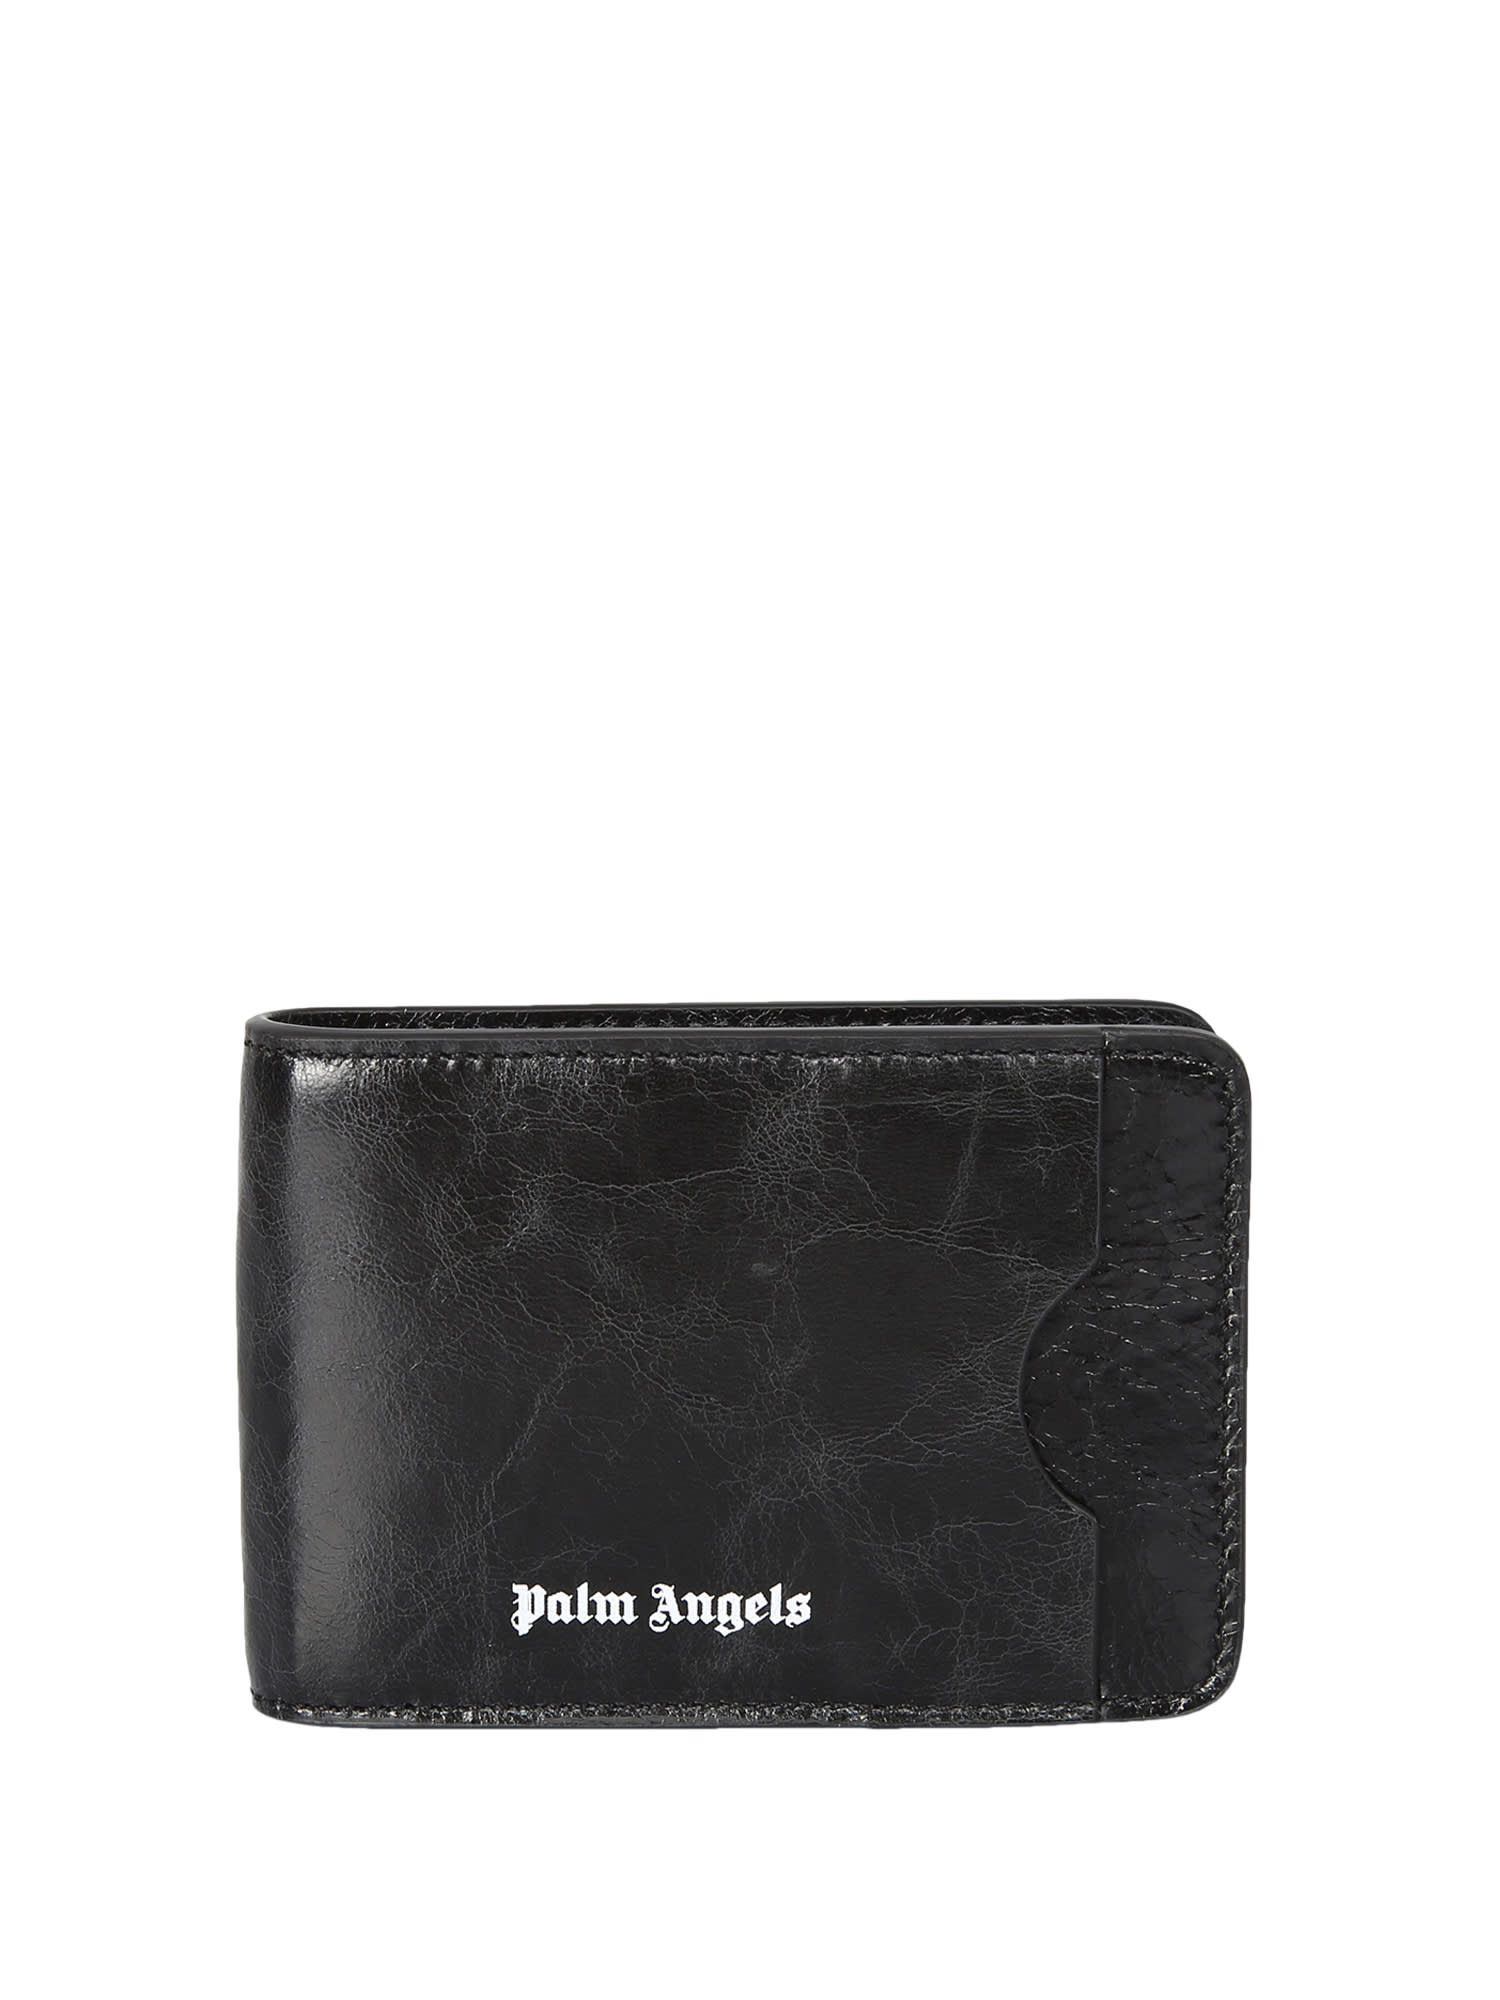 Palm Angels Branded Wallet